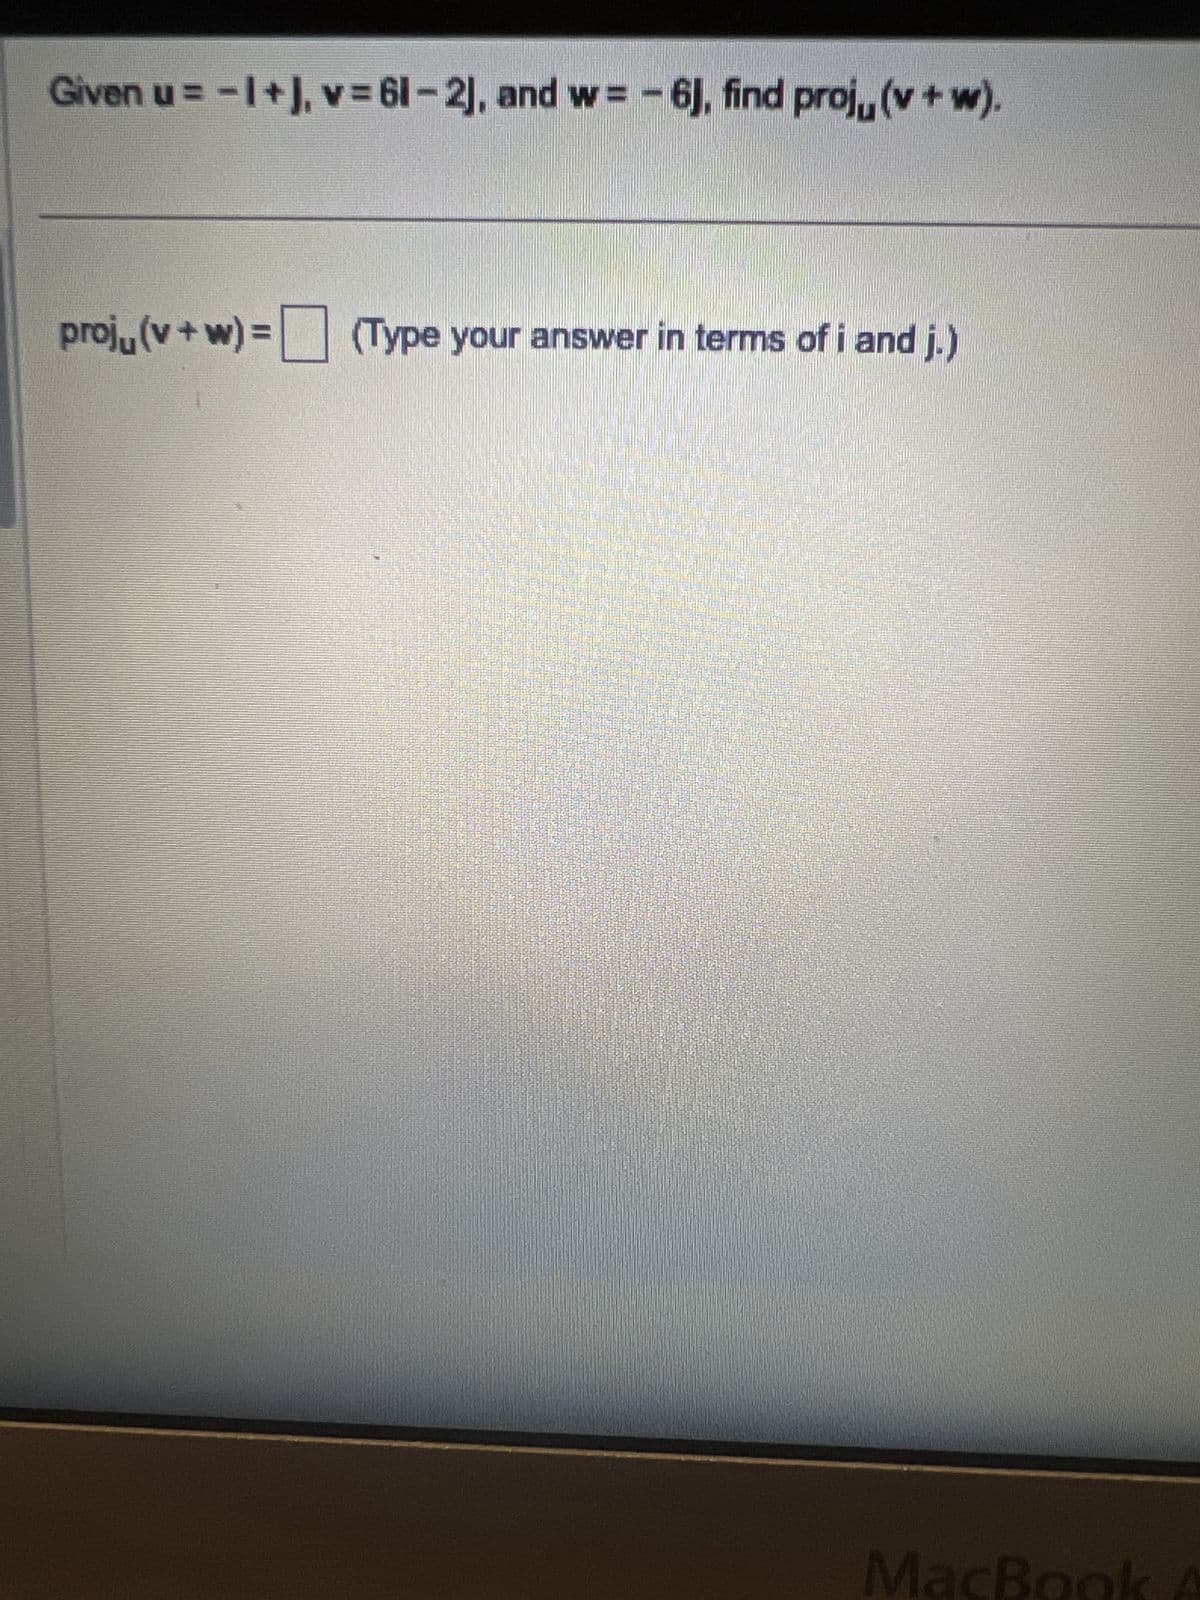 Given u = −1+], v=61-2], and w=6], find proju (v +w).
proj₁ (v+w) = ☐ (Type your answer in terms of i and j.)
Mac